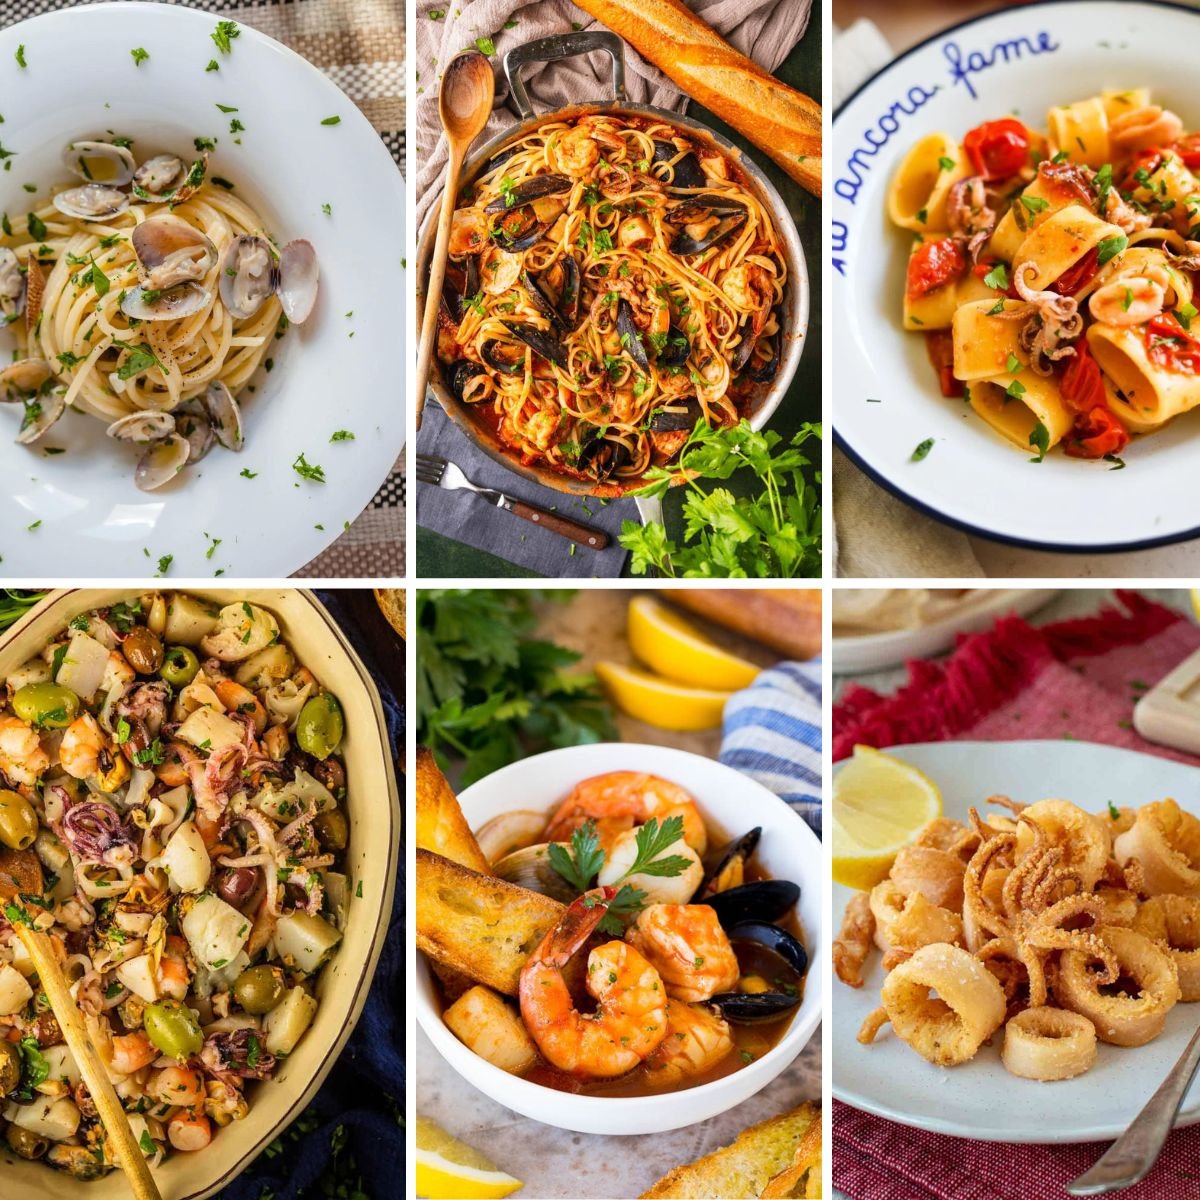 Italian Seafood Recipes for the Feast of the Seven Fishes